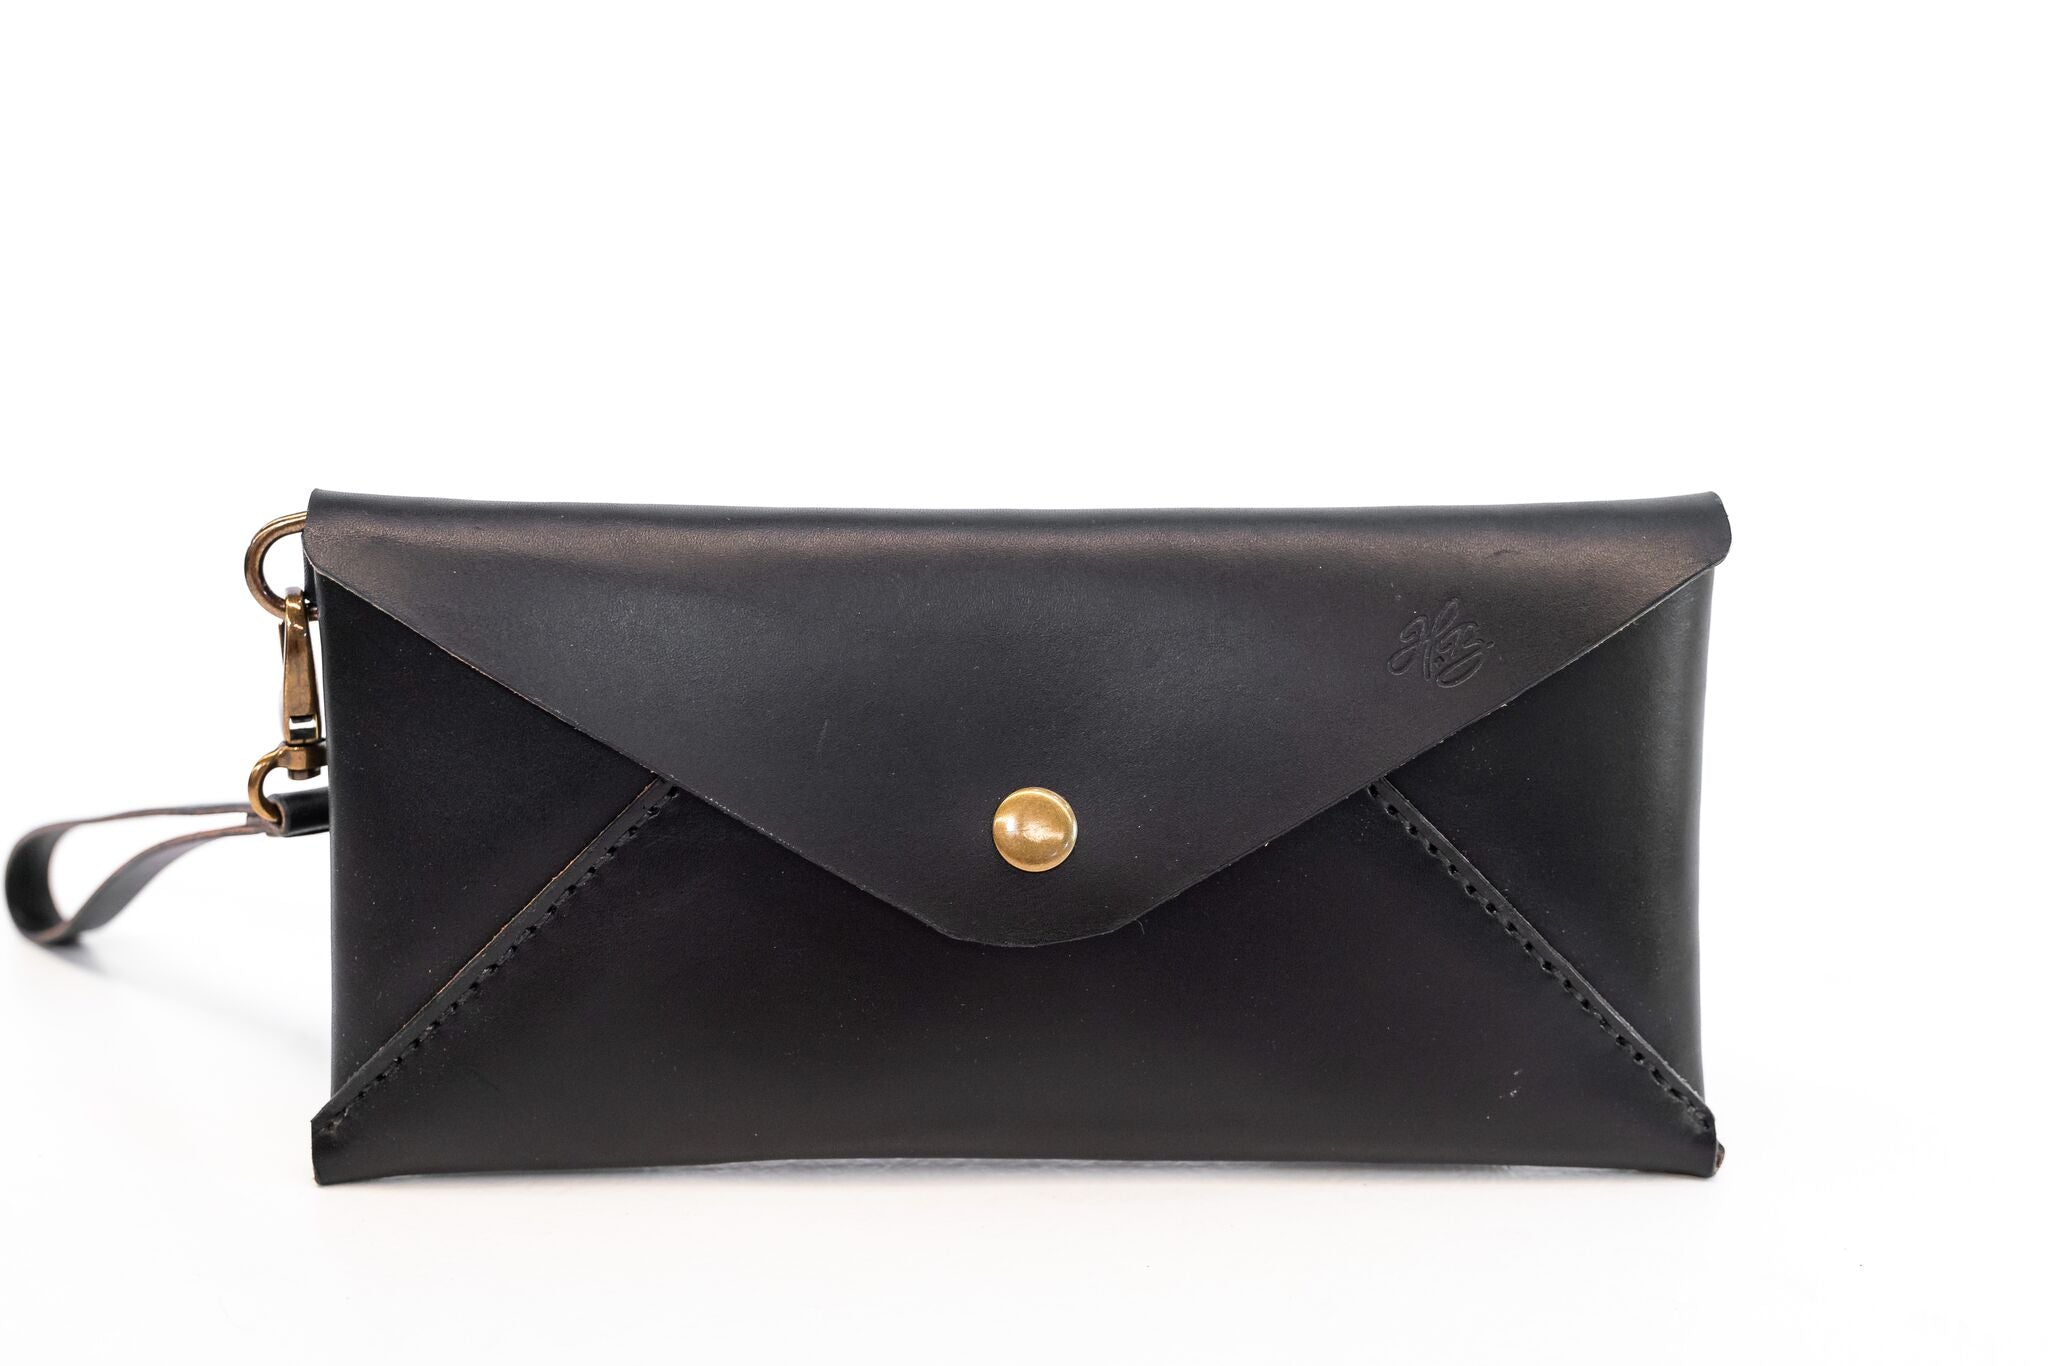 H+B CLUTCH | BLACK LEATHER CLUTCH PURSE | Hand+Built Leather Goods